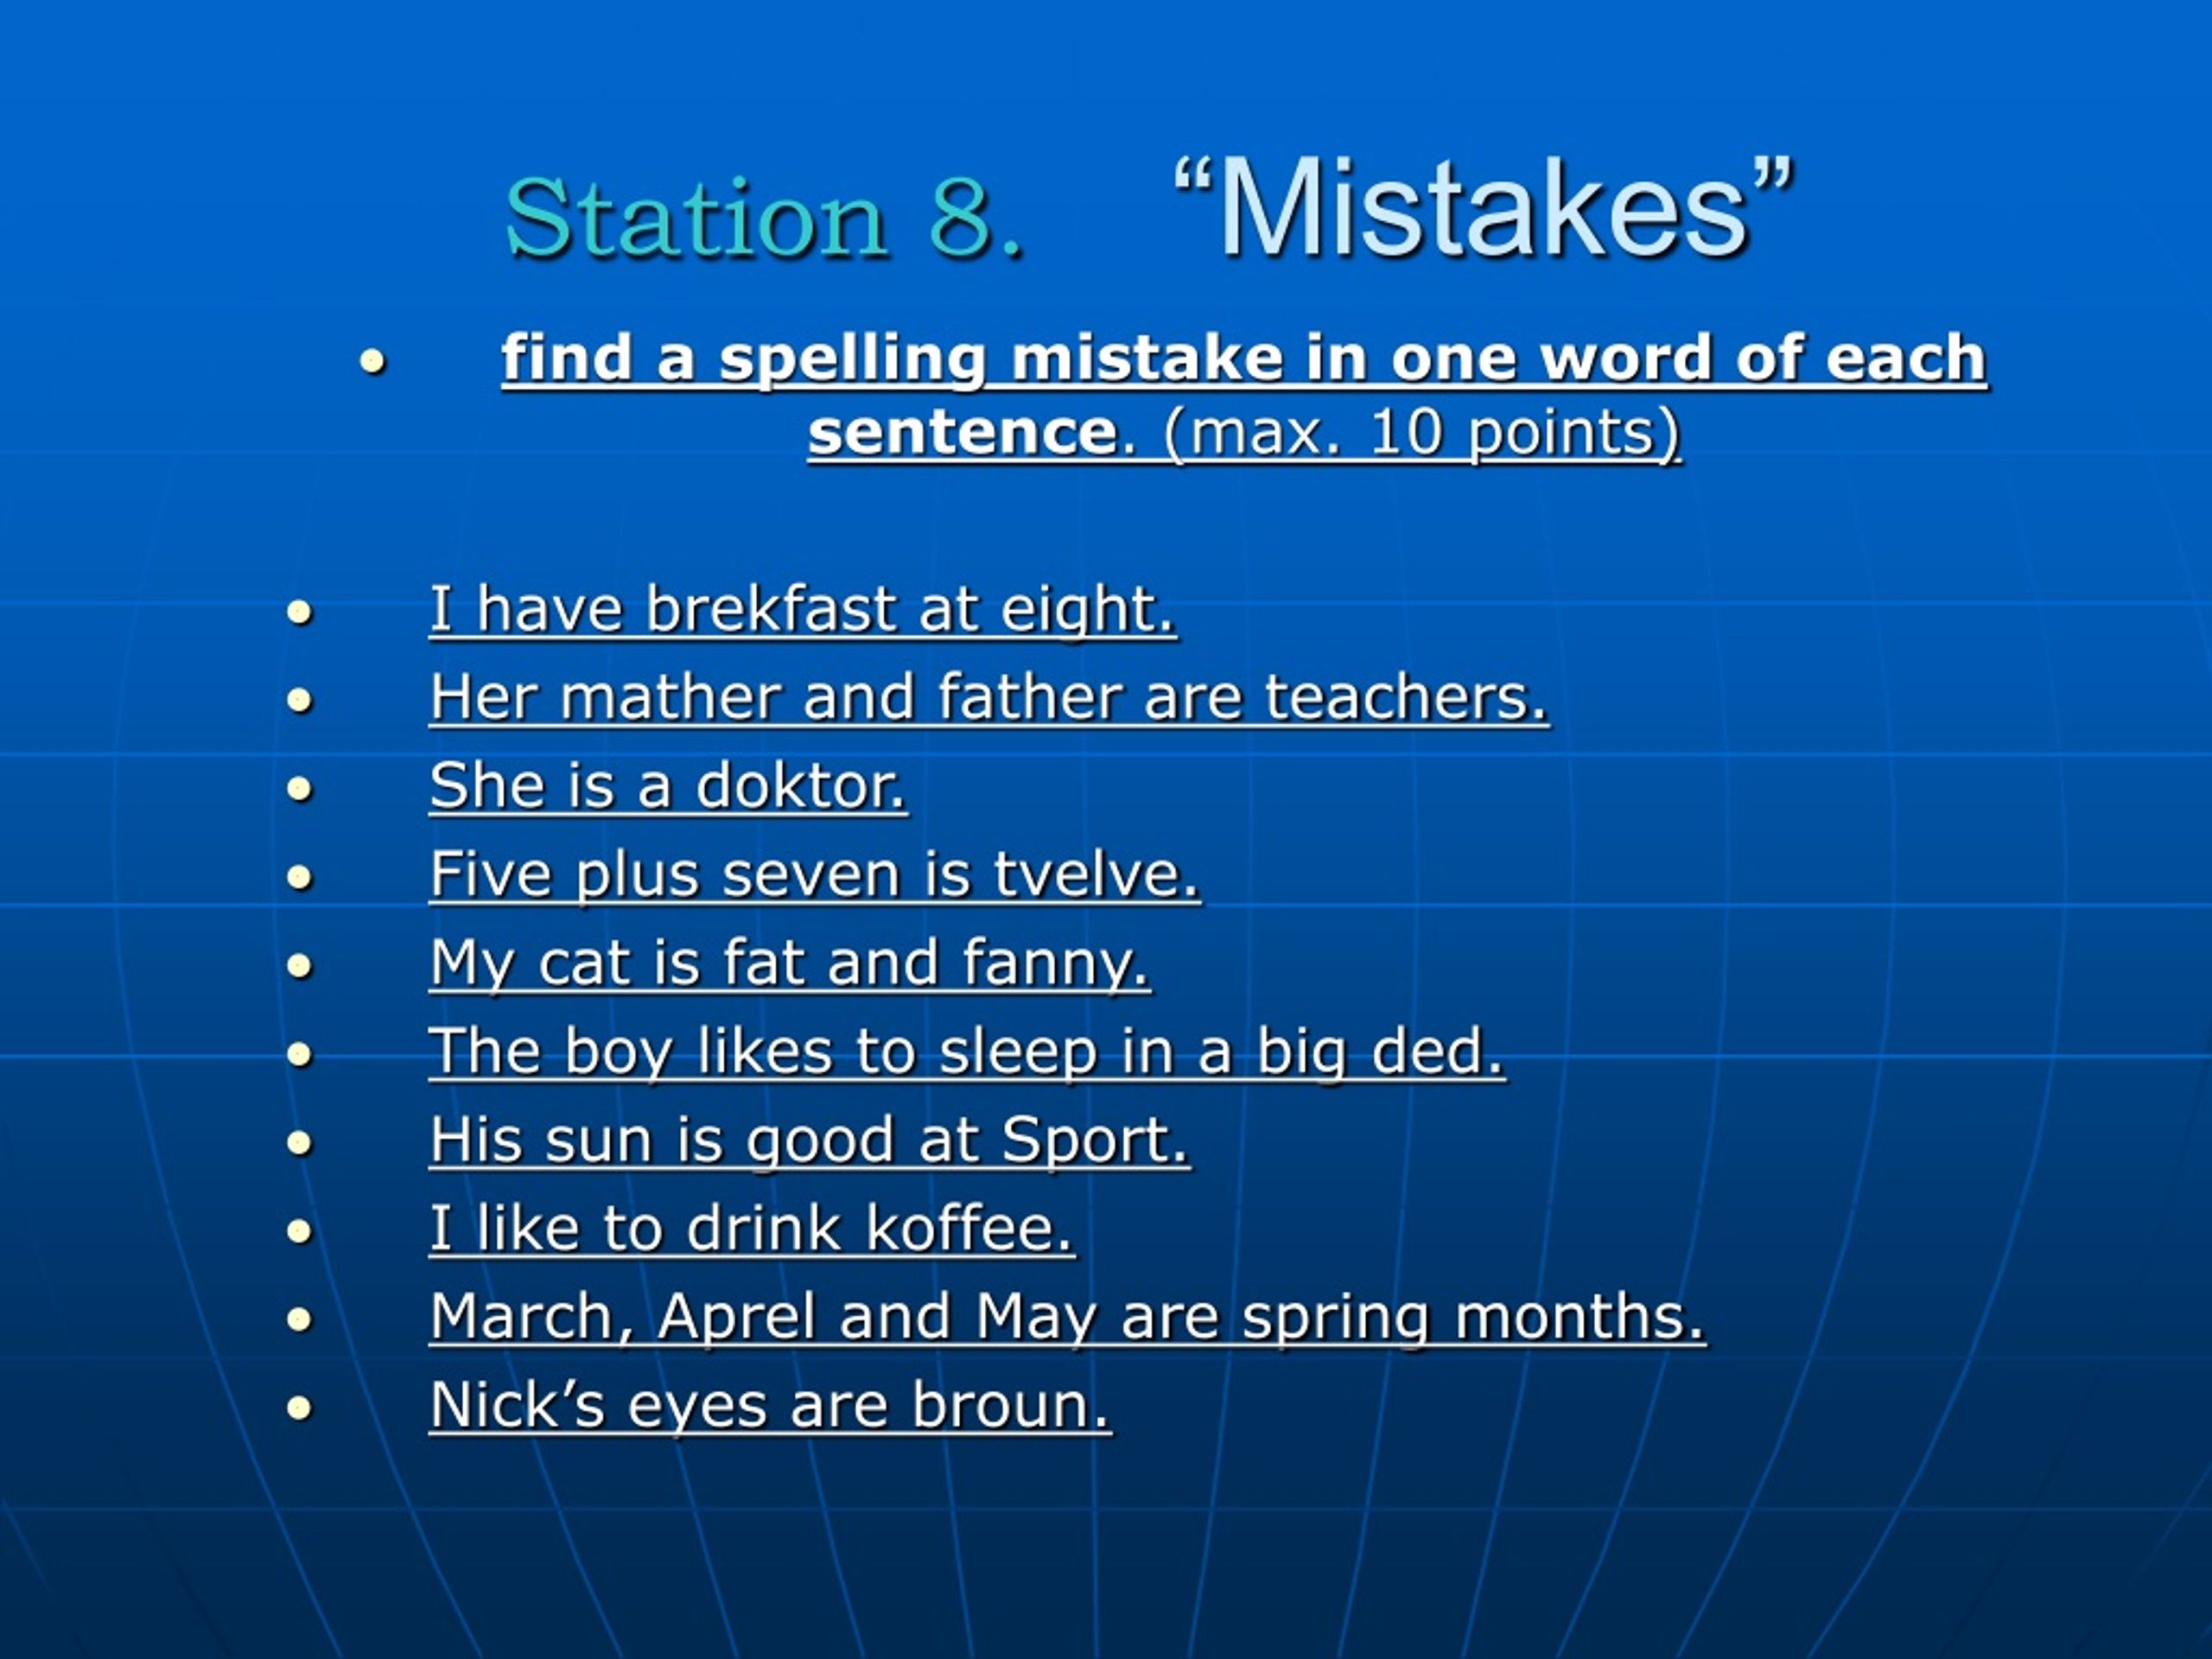 There is mistake in each sentence. Enjoy the Stations лингвистическая игра. Find Spelling mistakes. Find the mistake in each sentence. Find the mistakes.